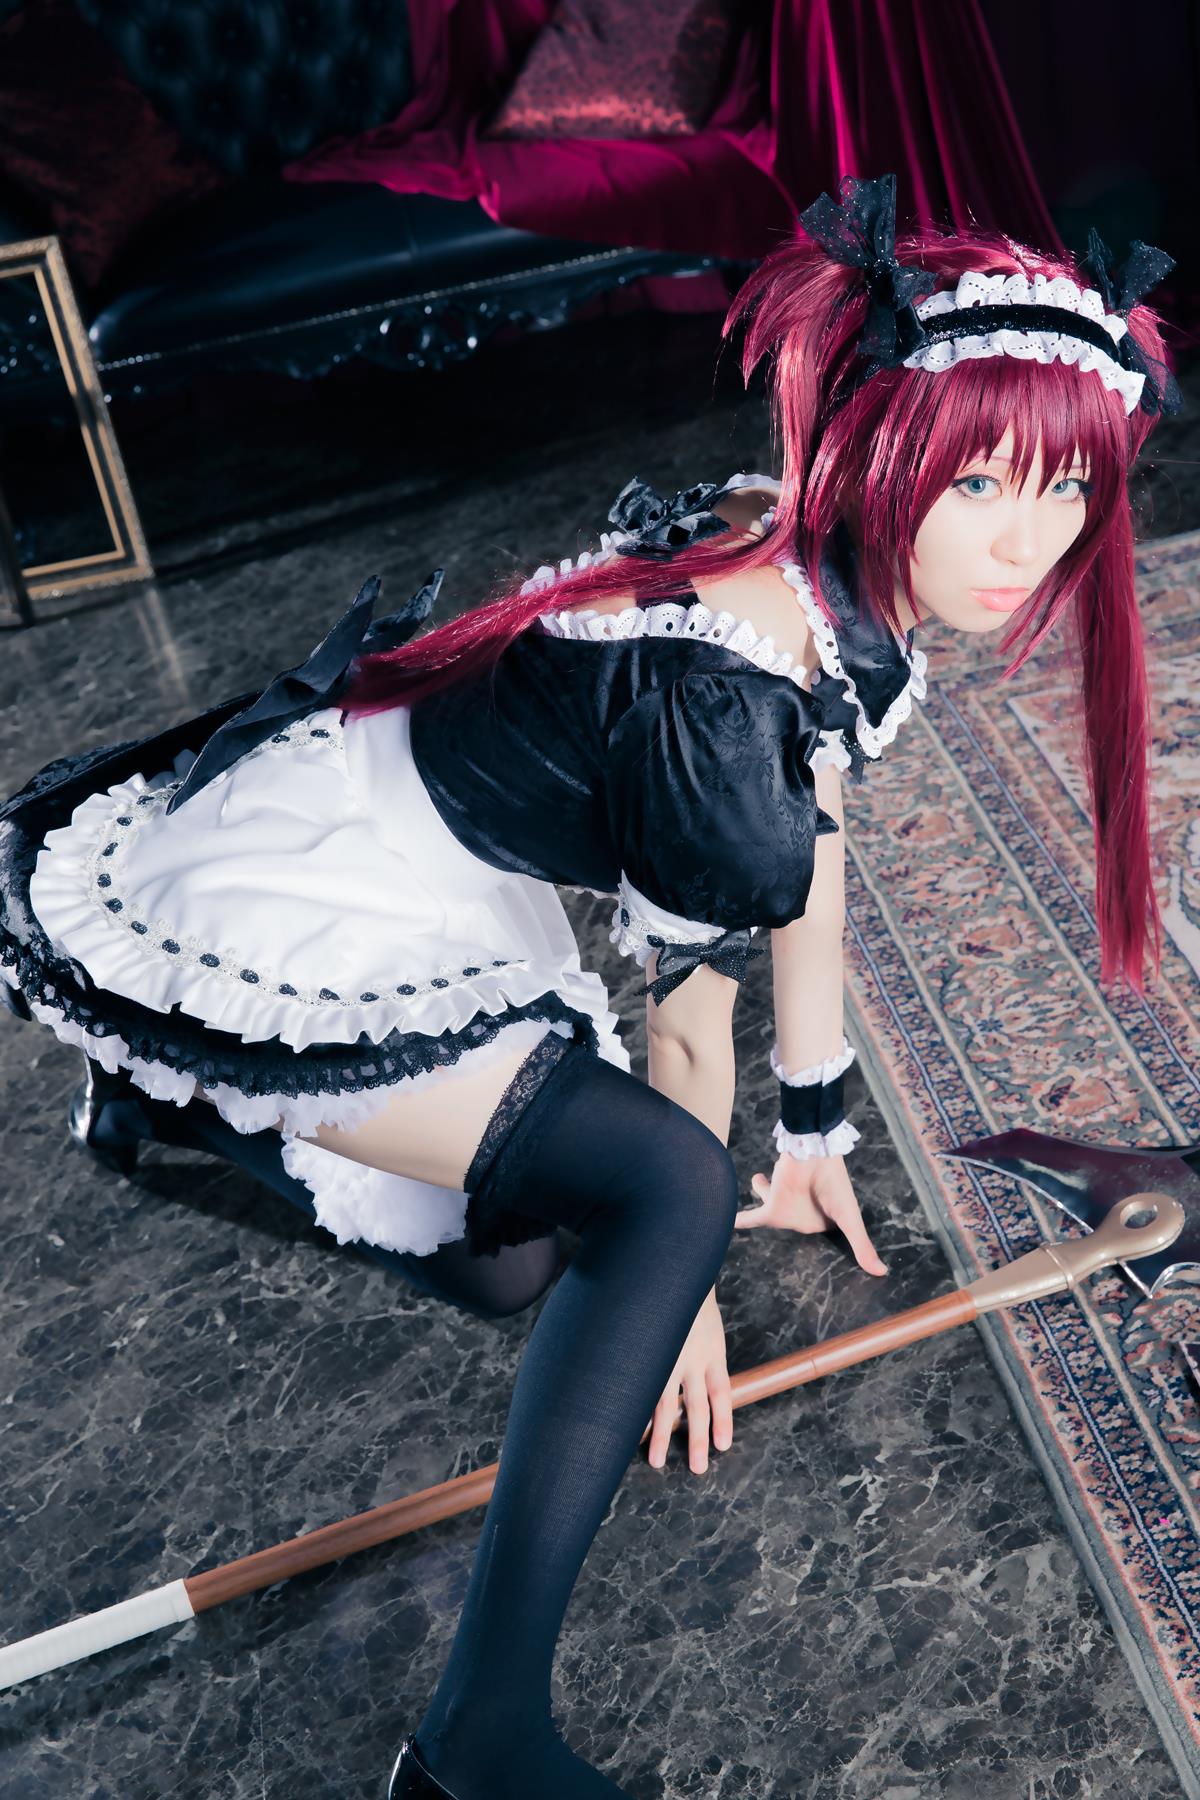 Mikehouse NO.026 Hakate HELL Queen s Blade - 12.jpg